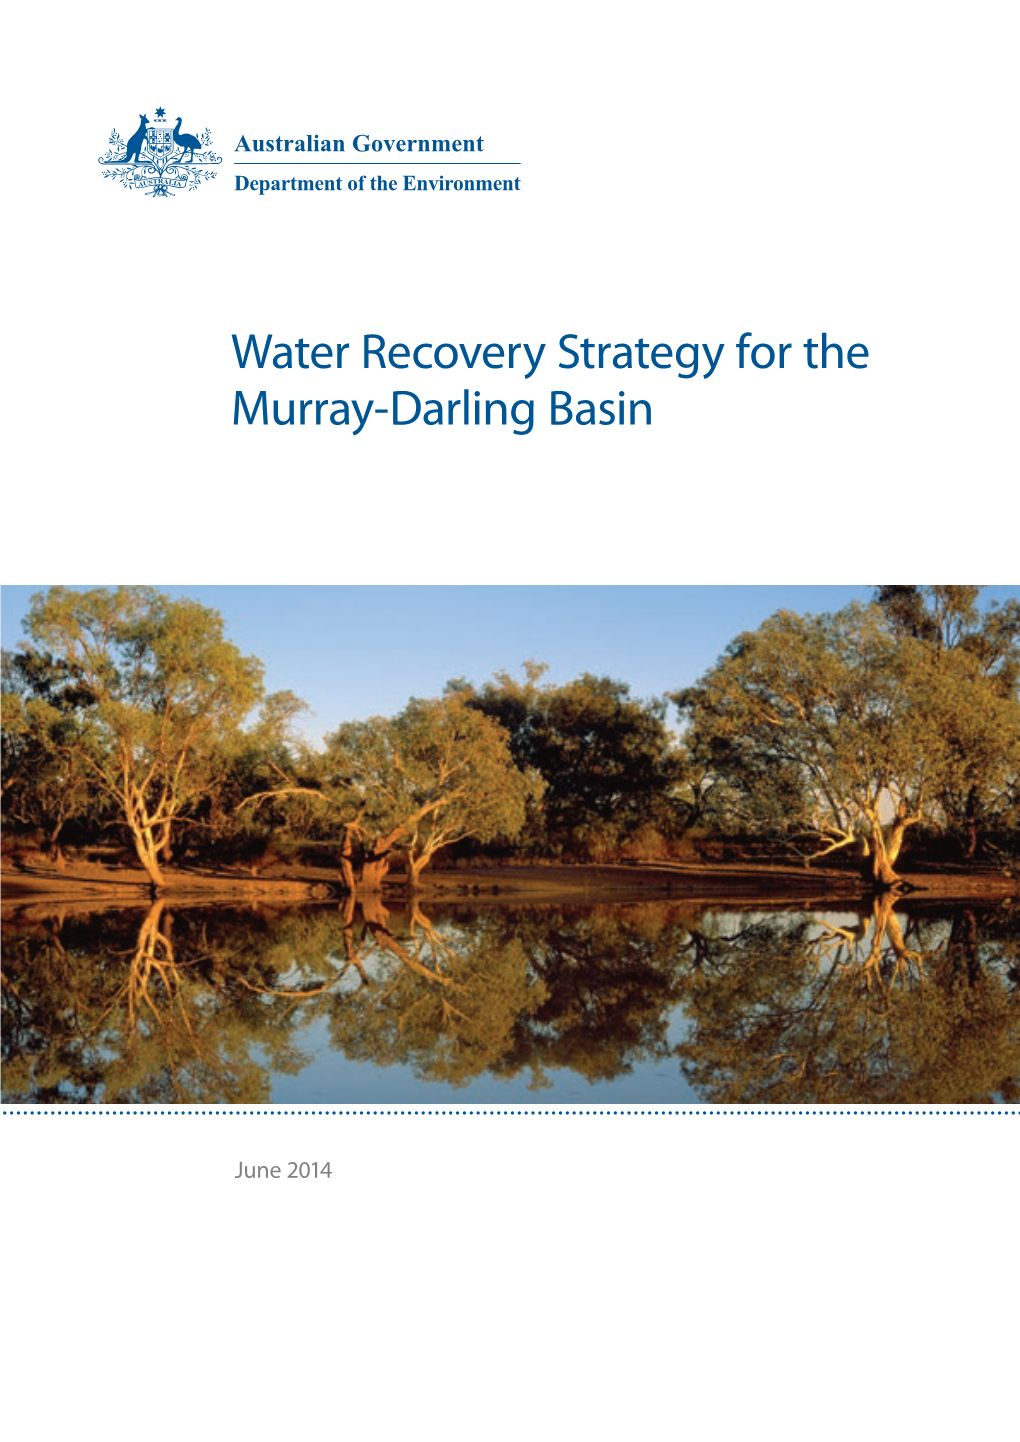 Water Recovery Strategy for the Murray-Darling Basin